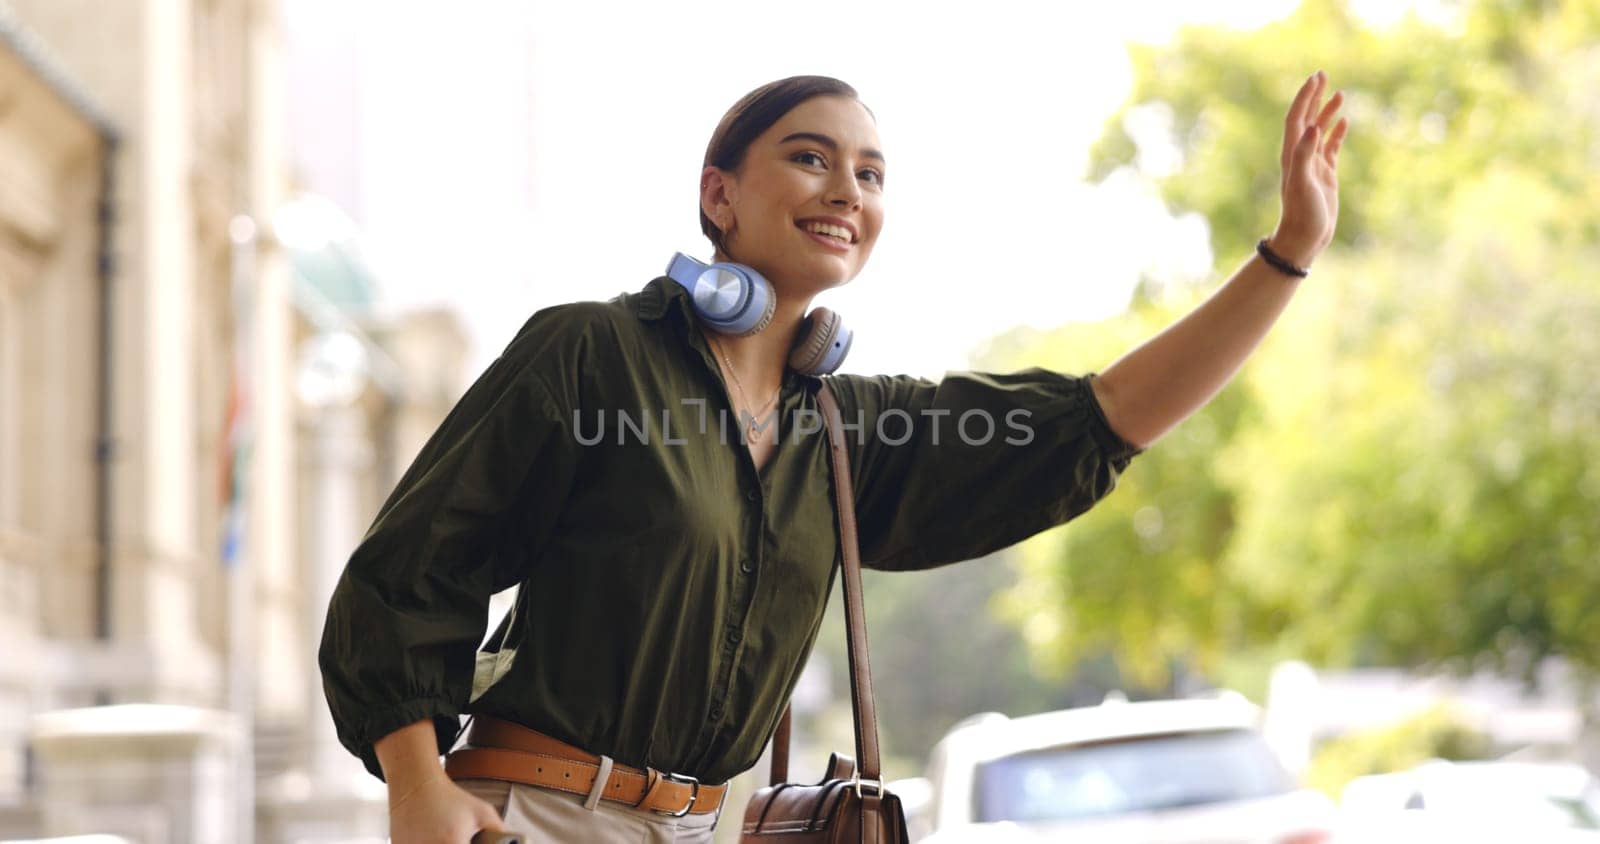 Happy, city and woman calling cab, taxi or public transport while exploring on adventure vacation. Travel, smile and young female person waving for transportation in town on holiday or weekend trip